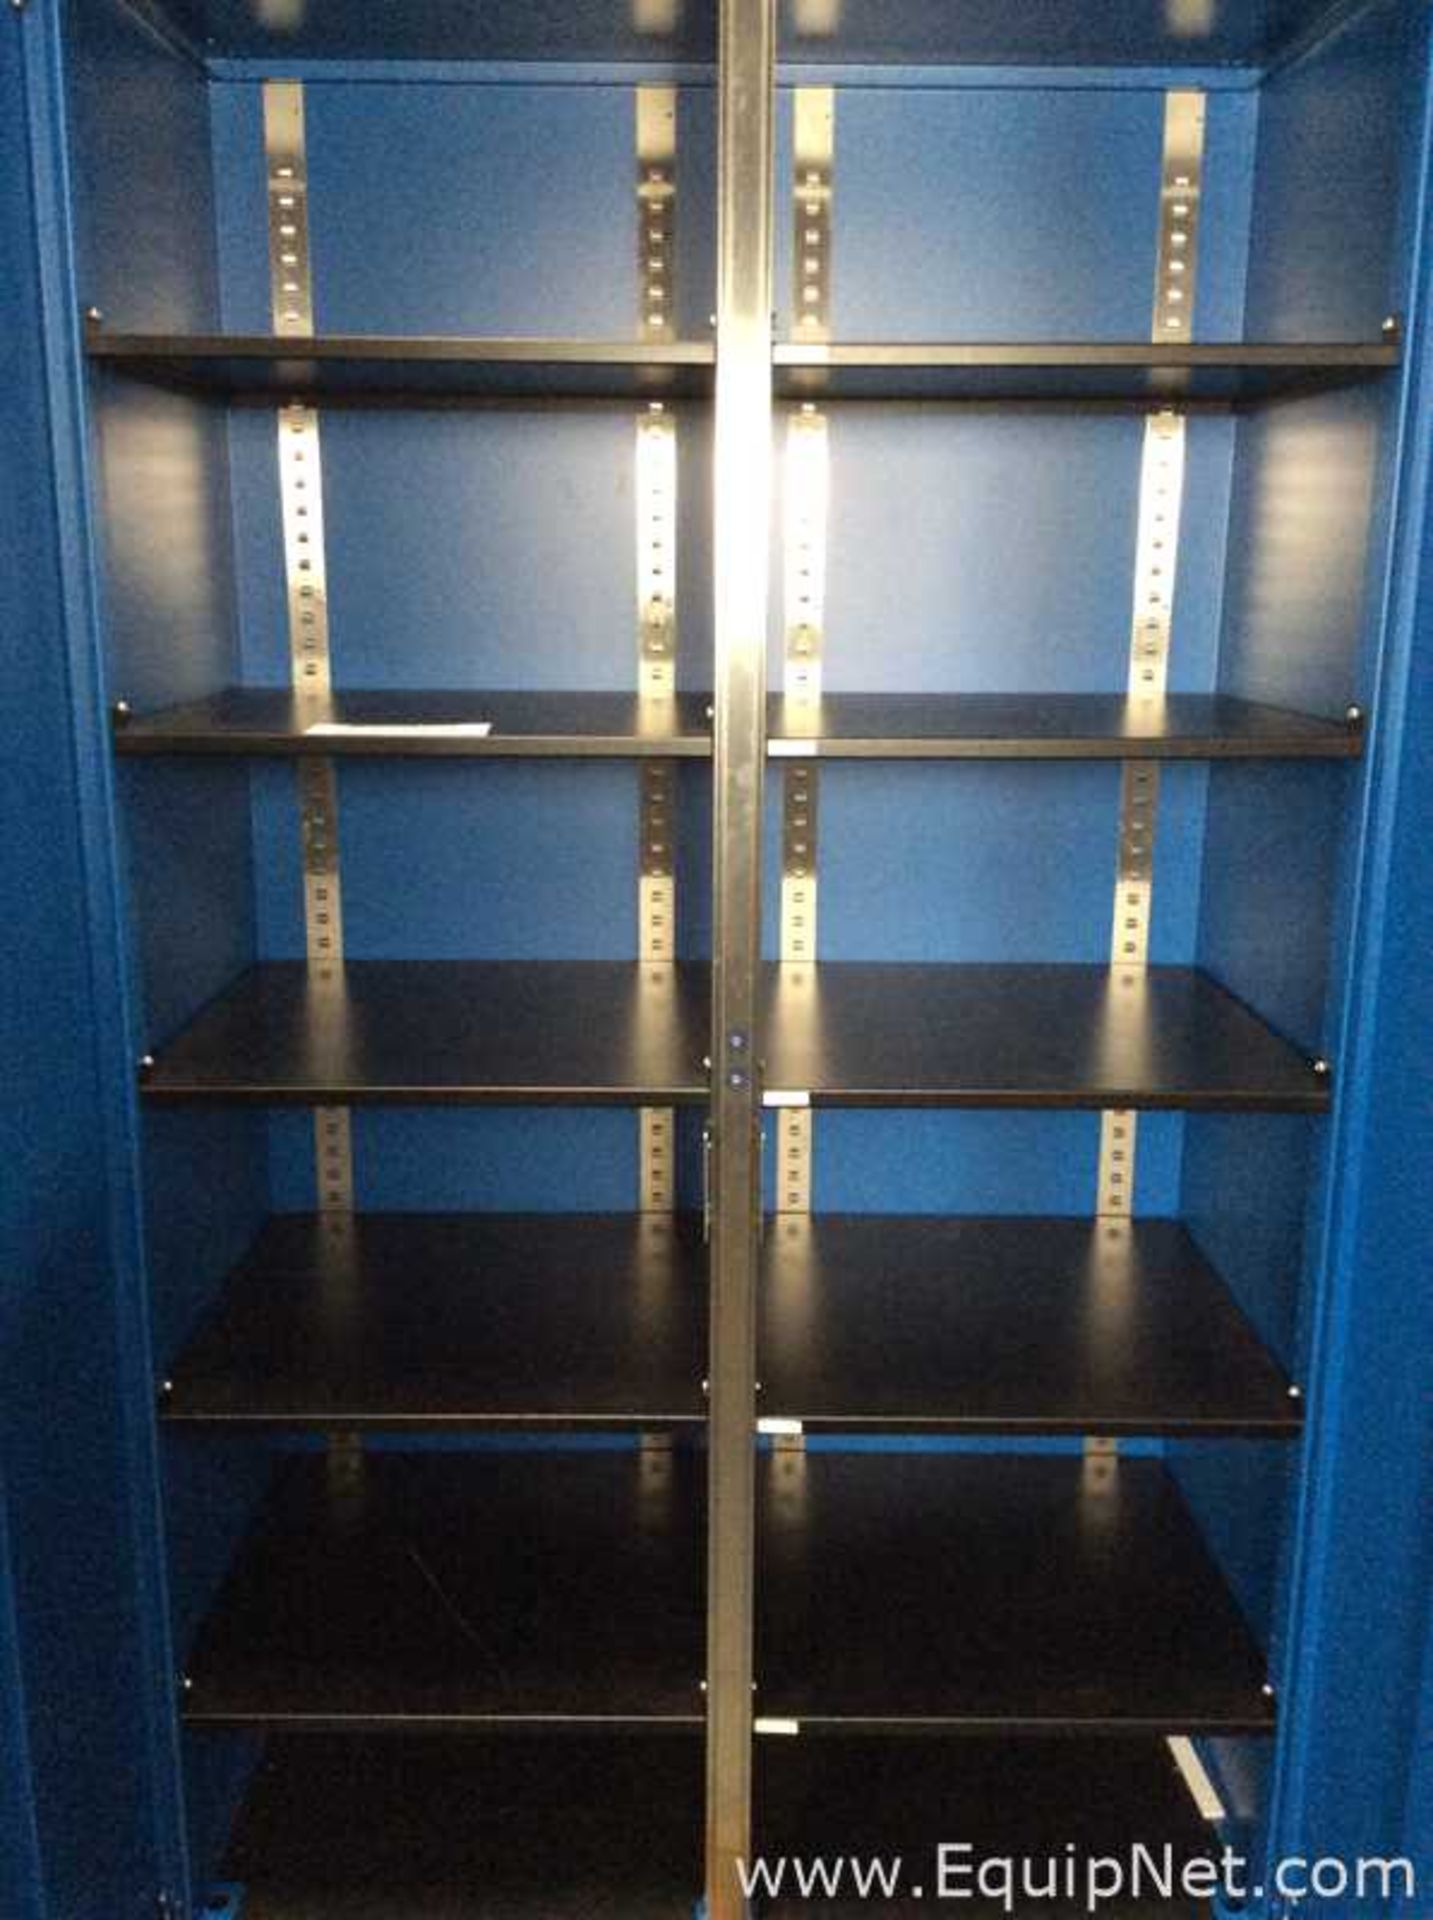 Protective Storage Systems 48-82 Storage Cabinet - Image 2 of 3